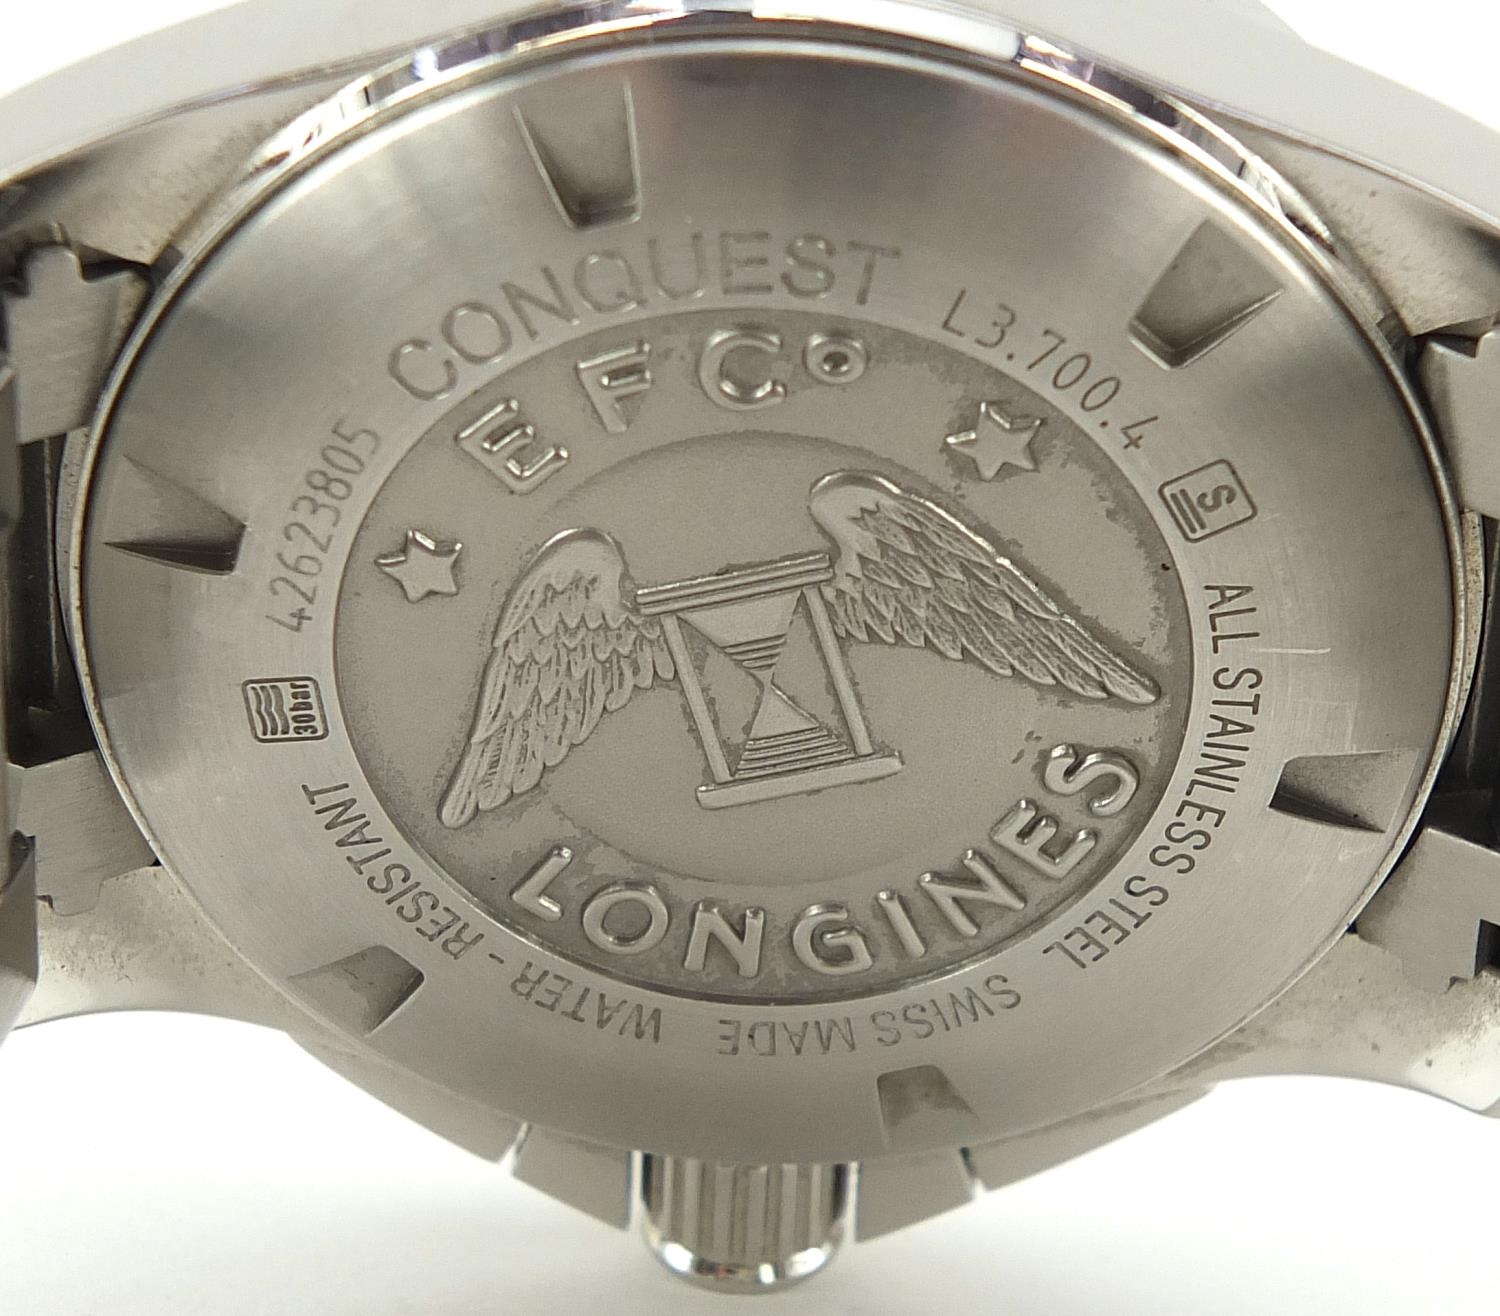 Longines, gentlemen's Longines E F Co Conquest chronograph wristwatch, the case numbered 42623805, - Image 6 of 8